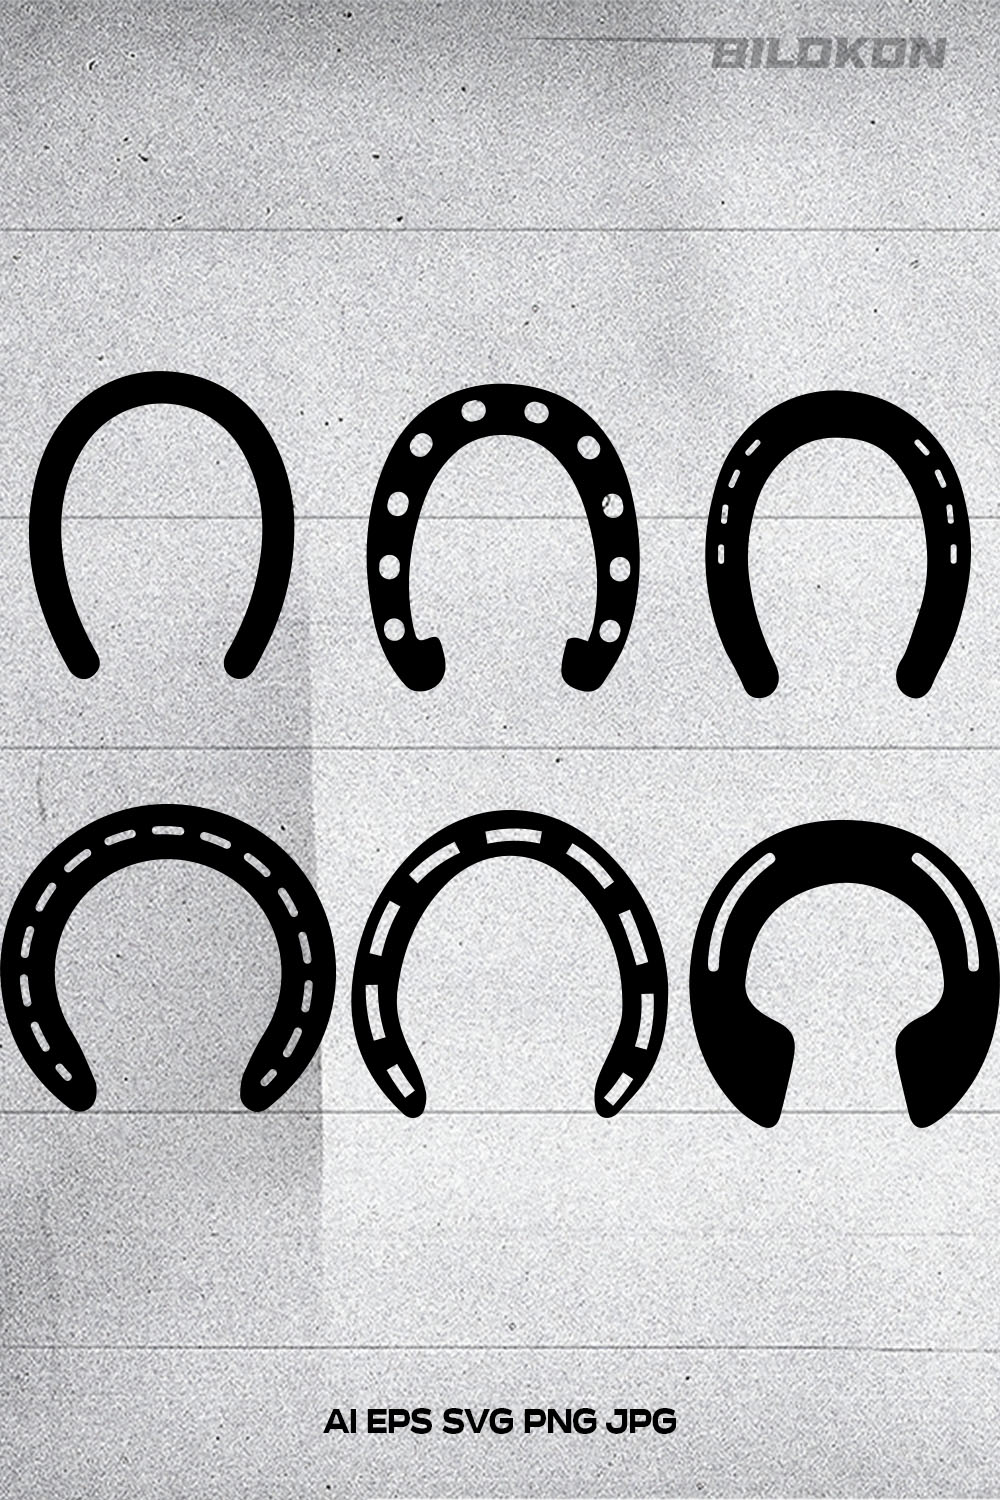 Bunch of different types of horseshoes on a piece of paper.